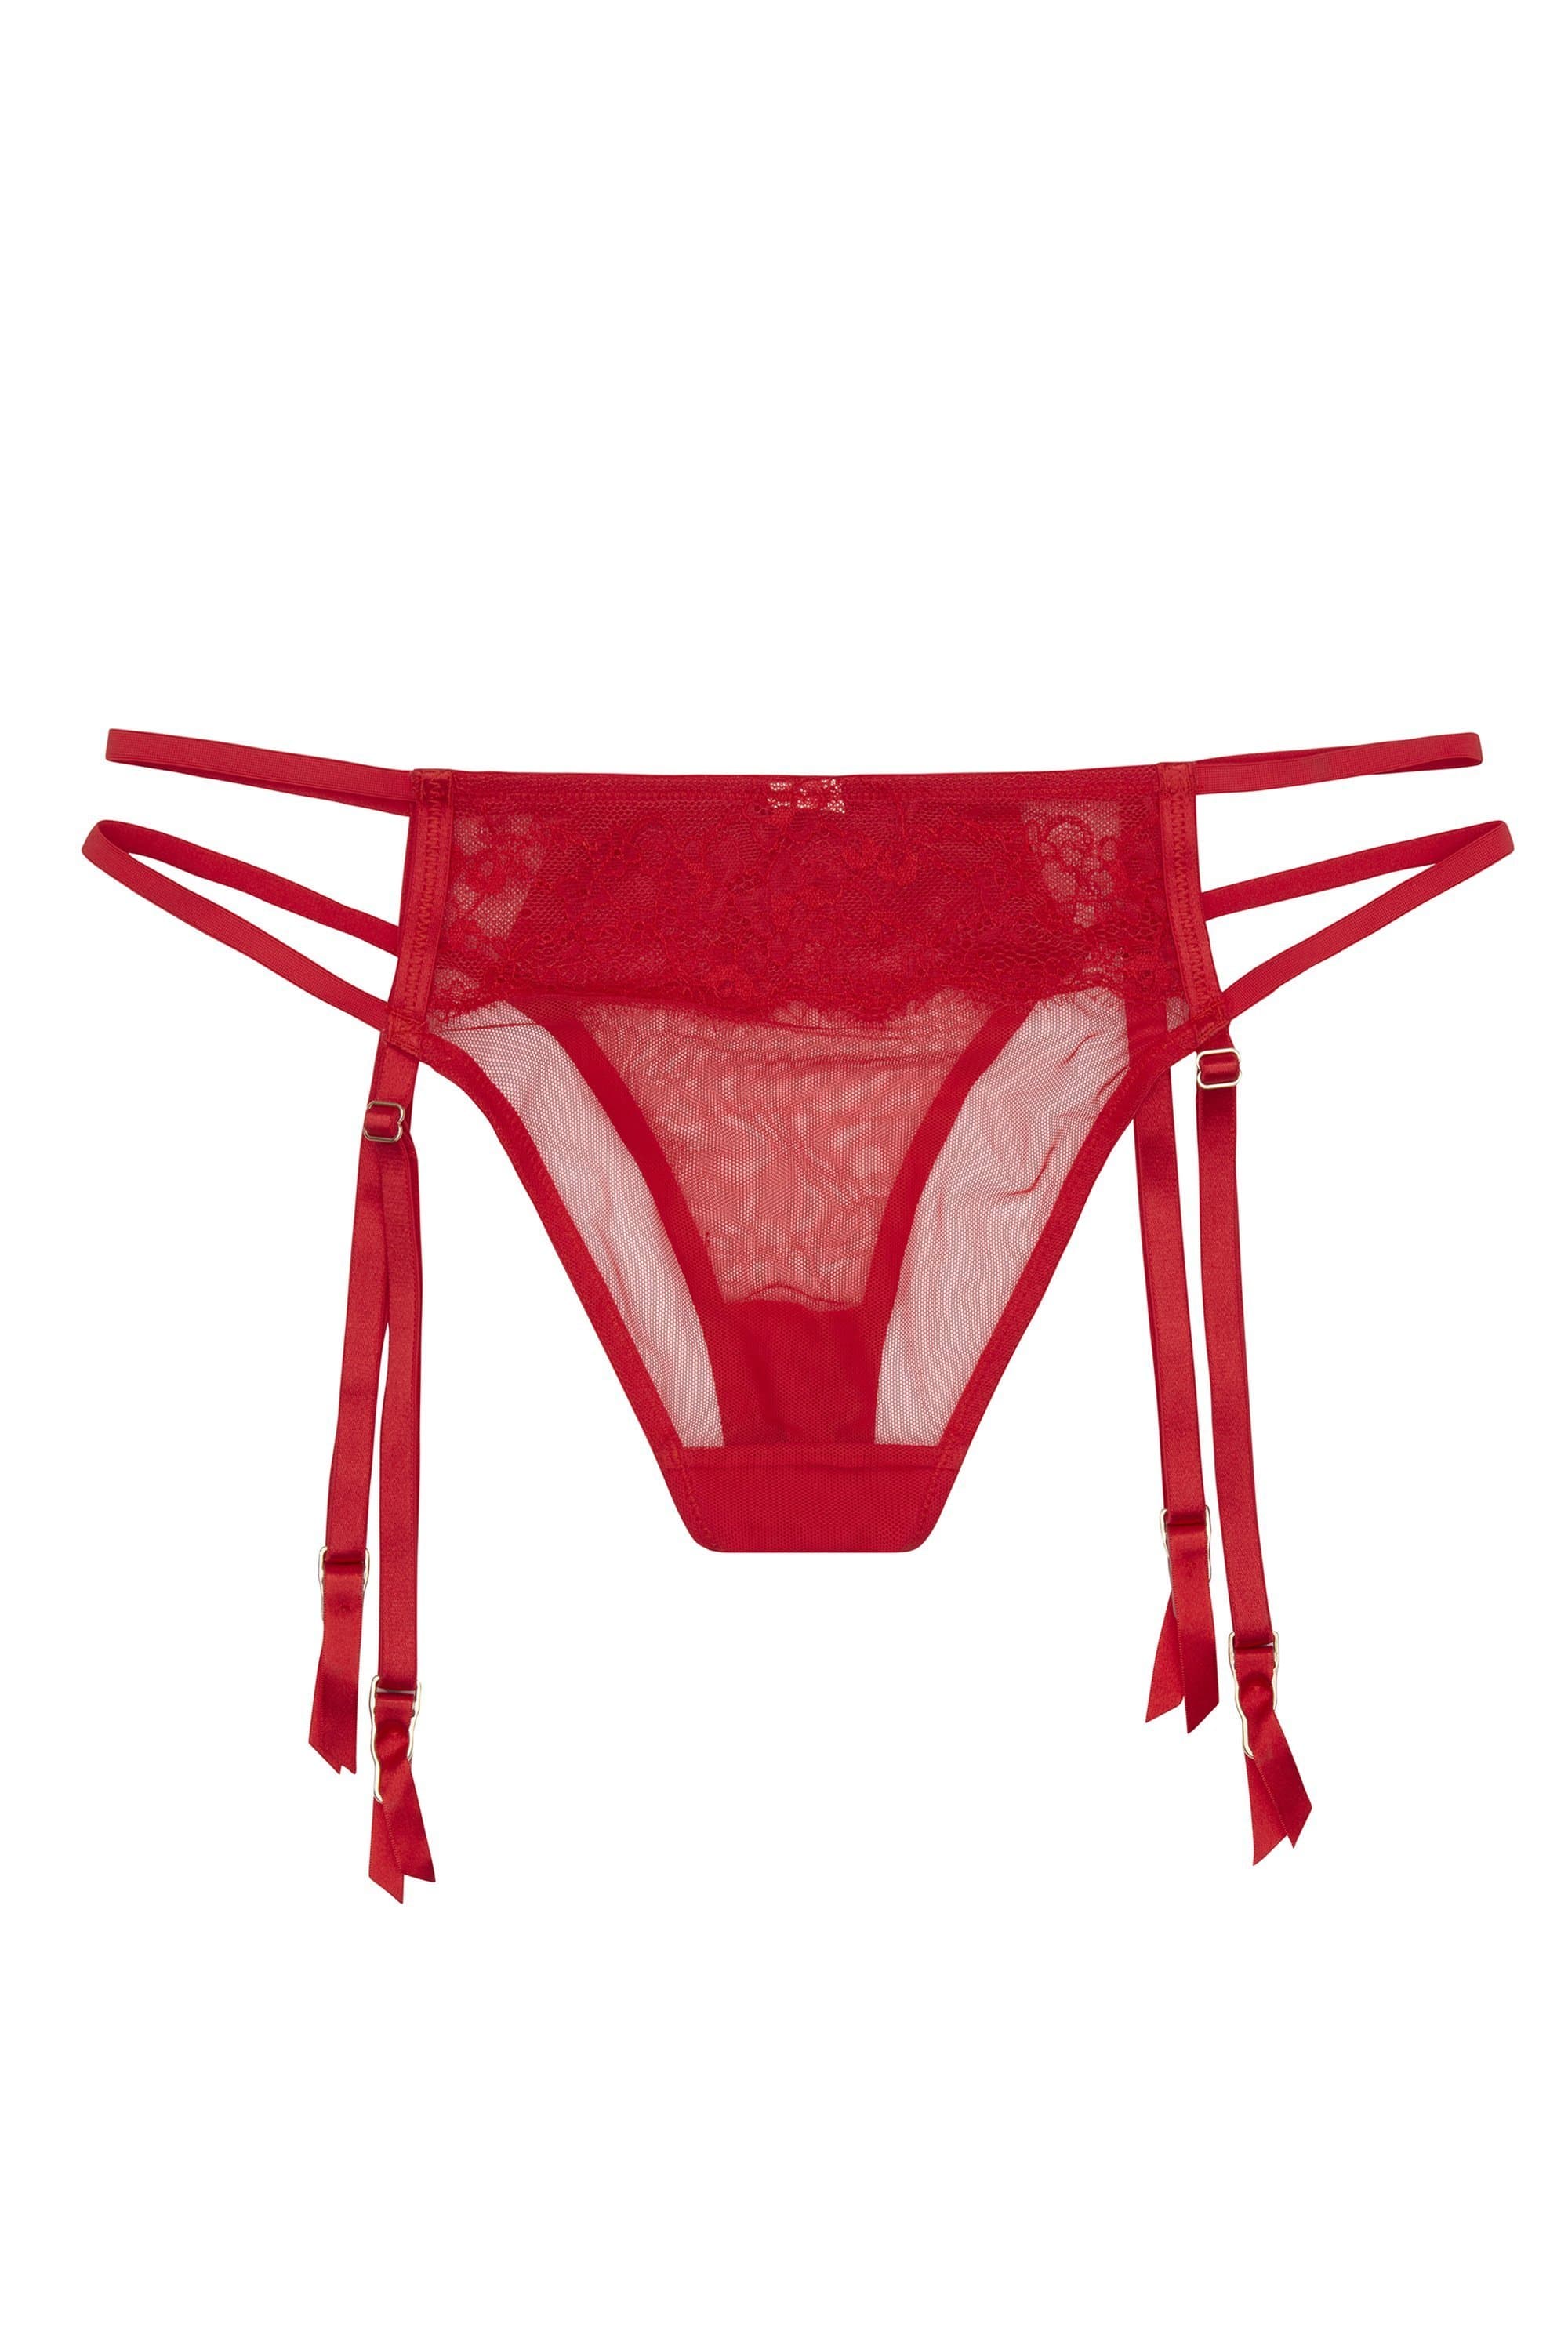 Lacy Box on X: Read our Guide to Womens Underwear Styles   #guide #knickers #lingerie #styles #panties   / X